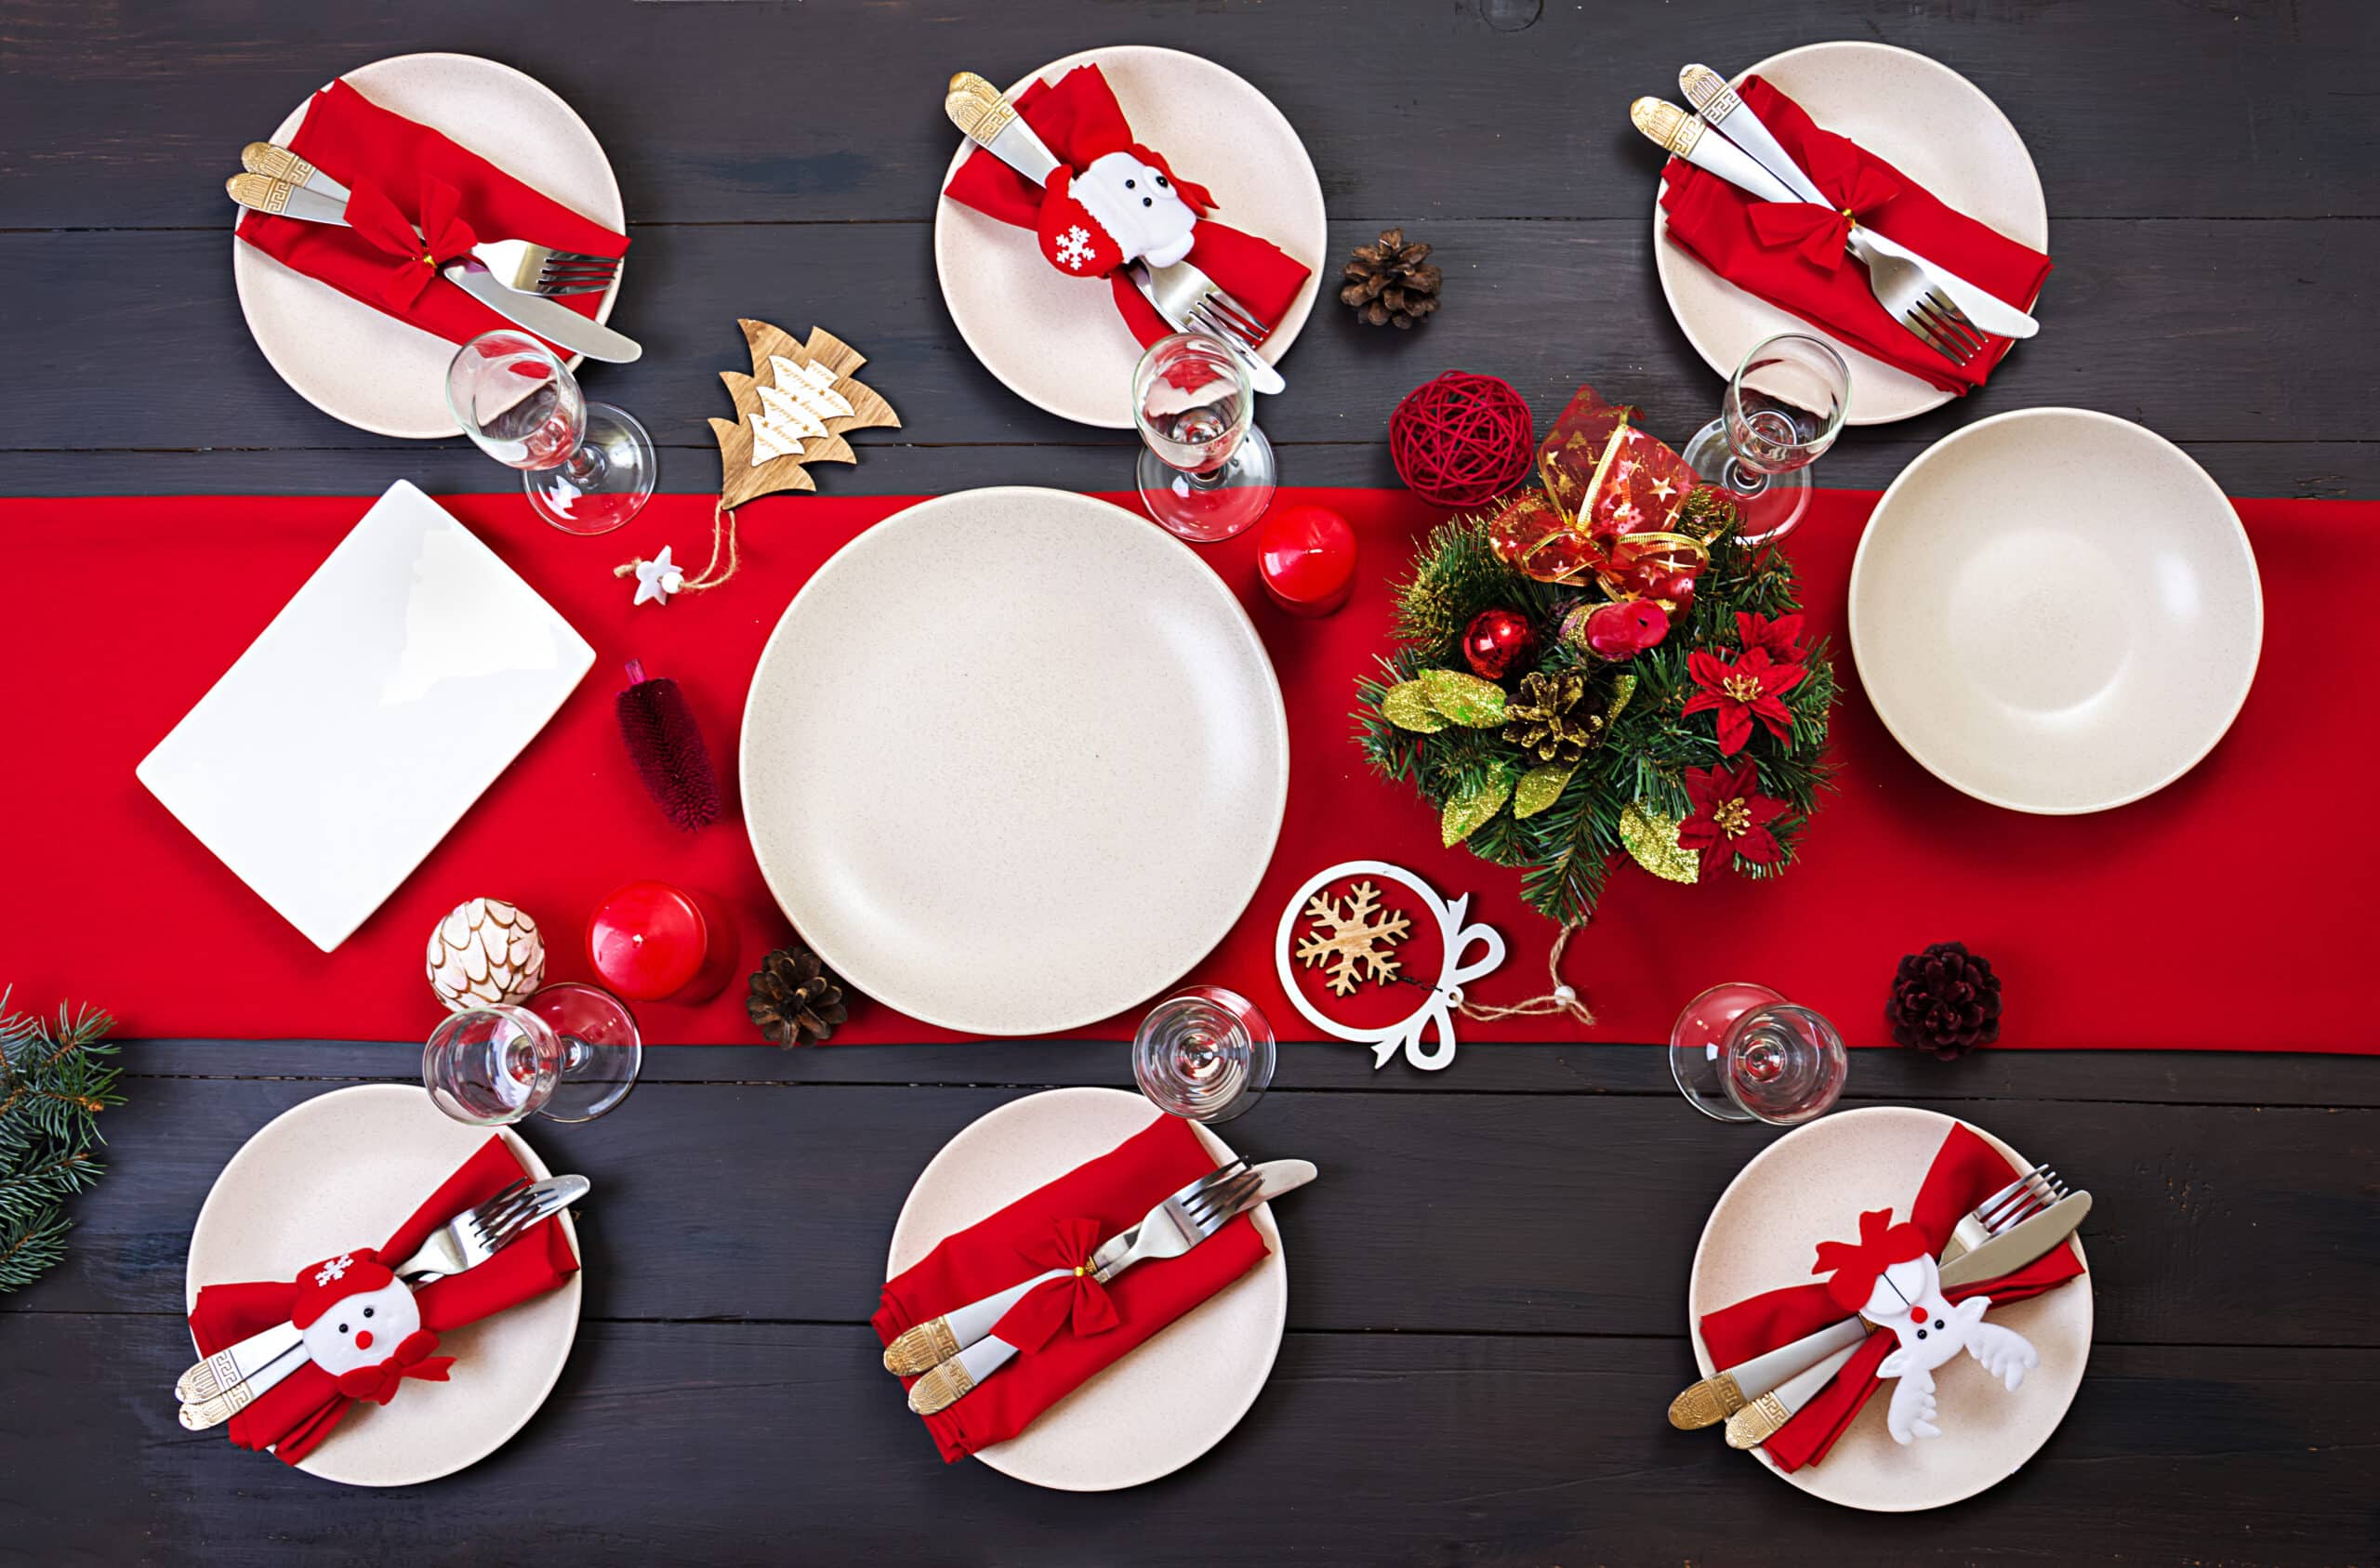 Christmas table decoration for the little ones